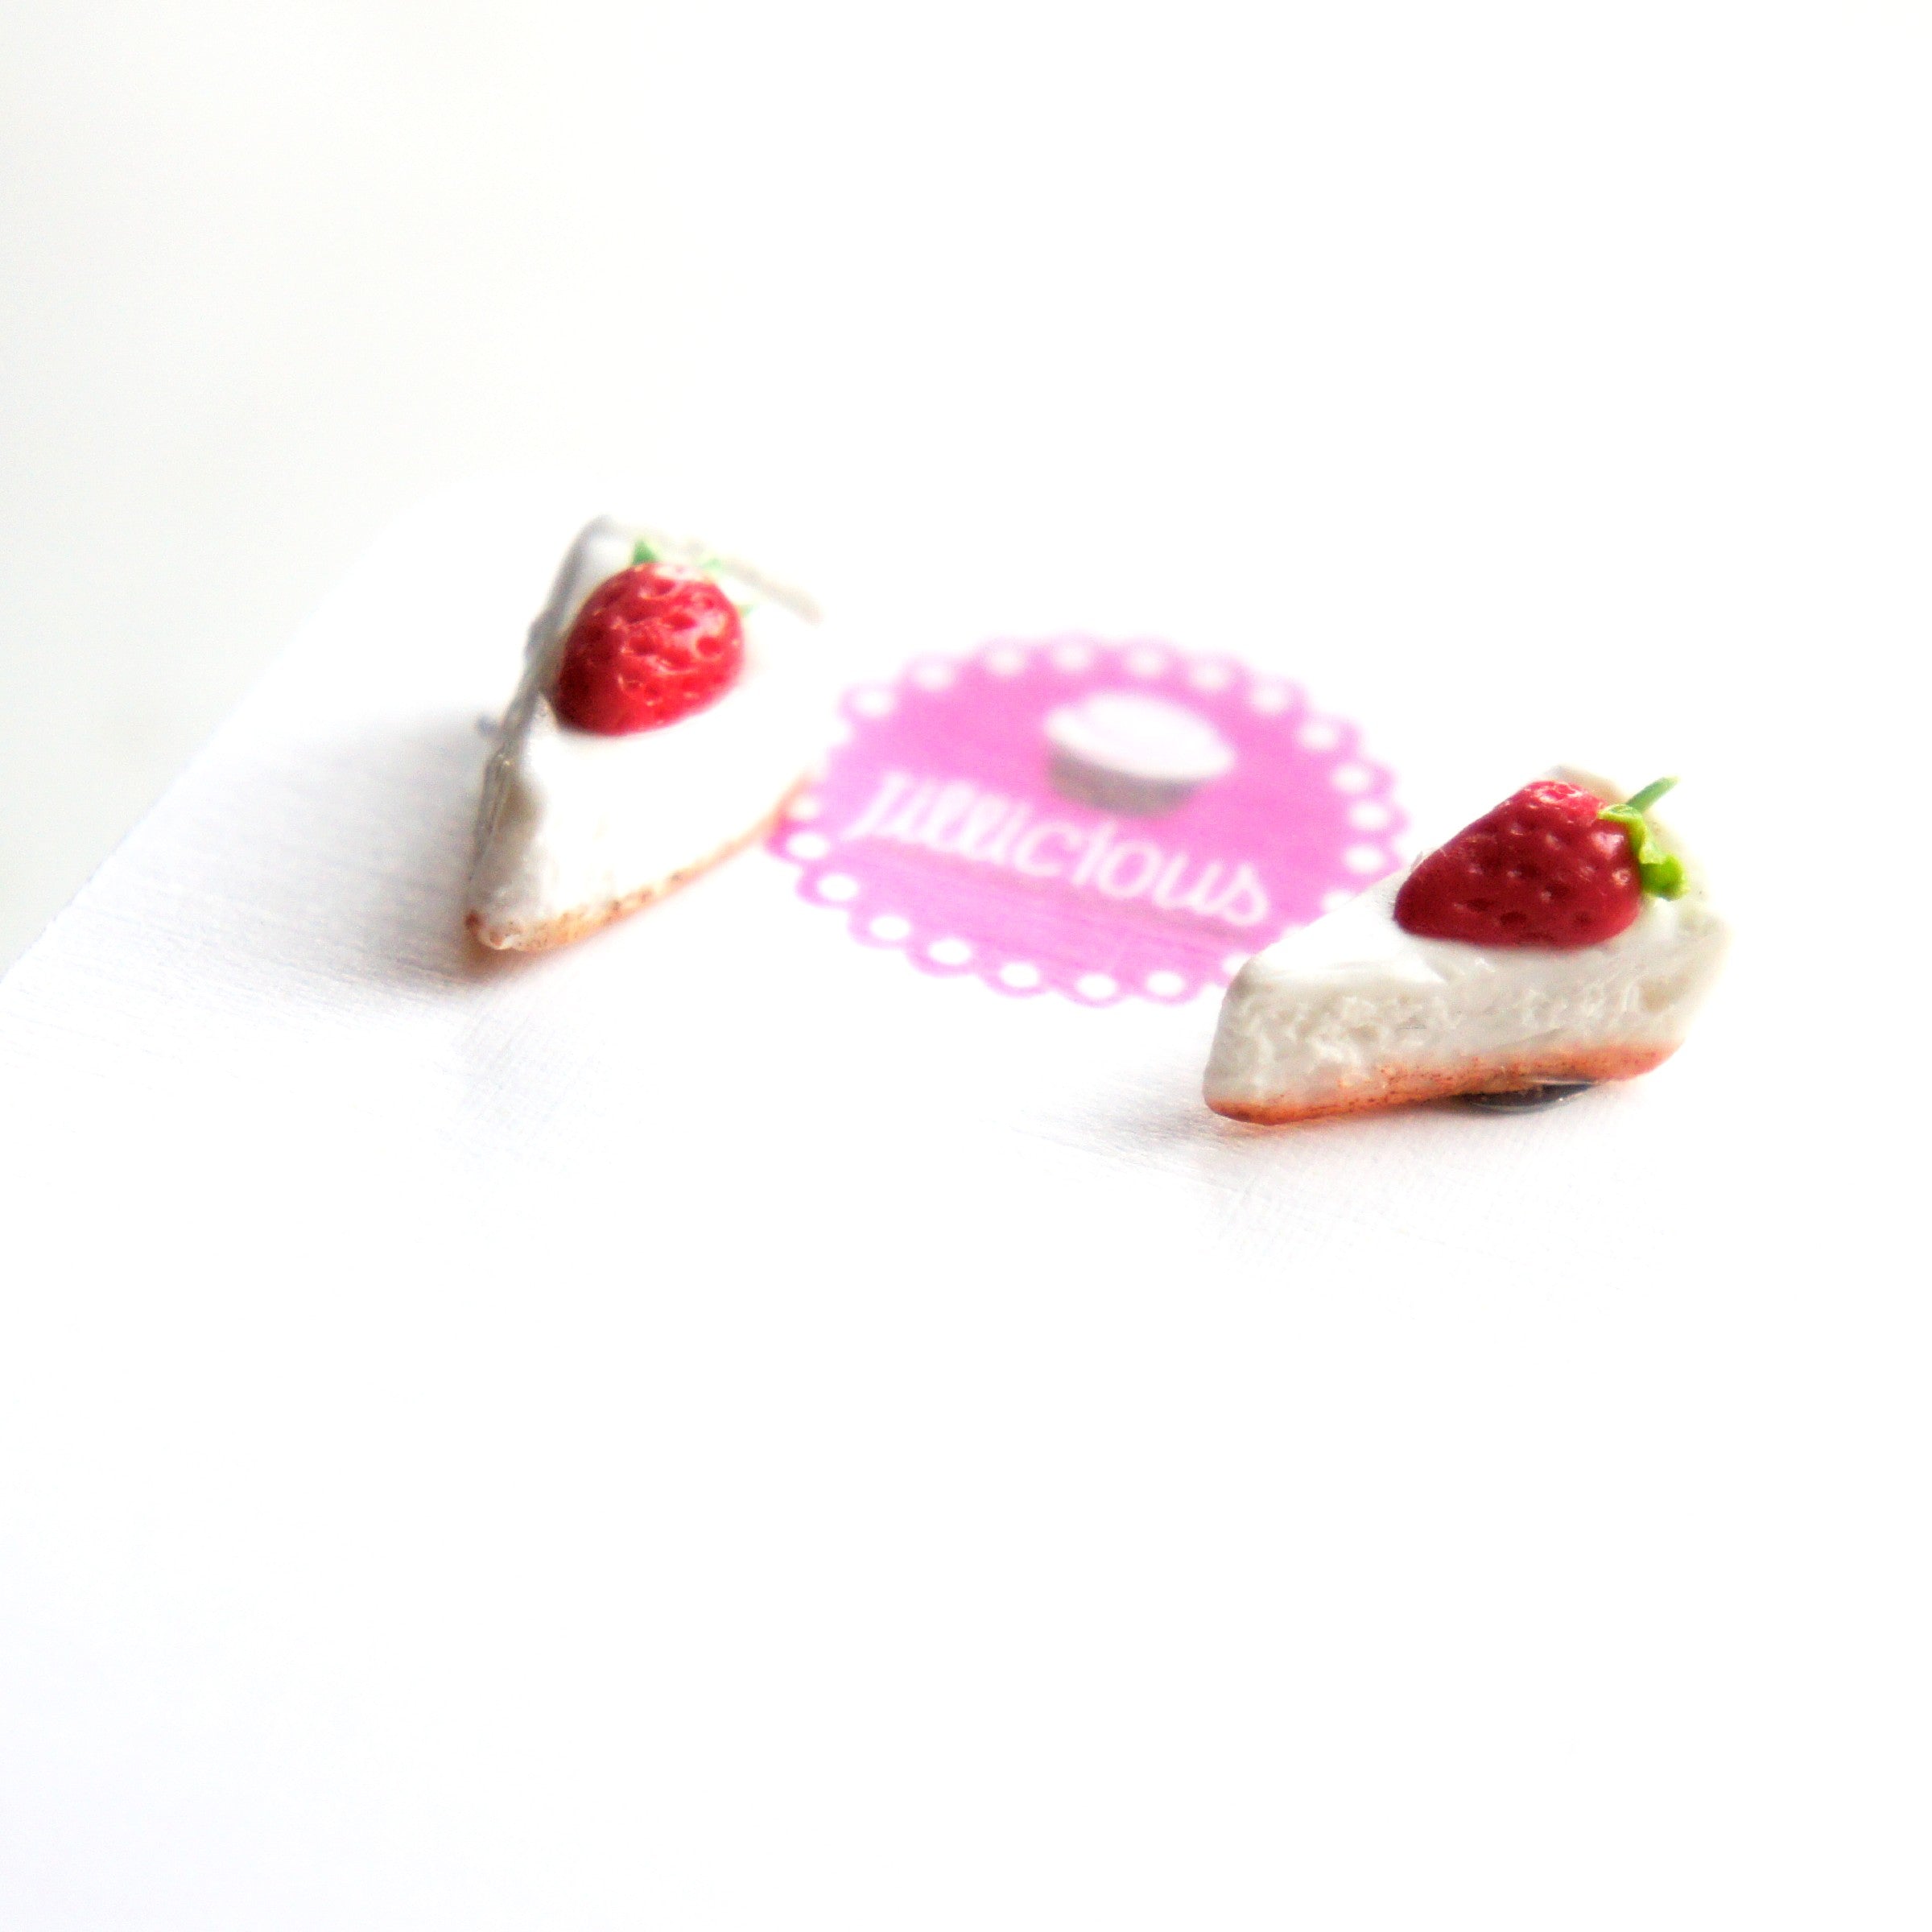 Strawberry Cheesecake Stud Earrings - Jillicious charms and accessories